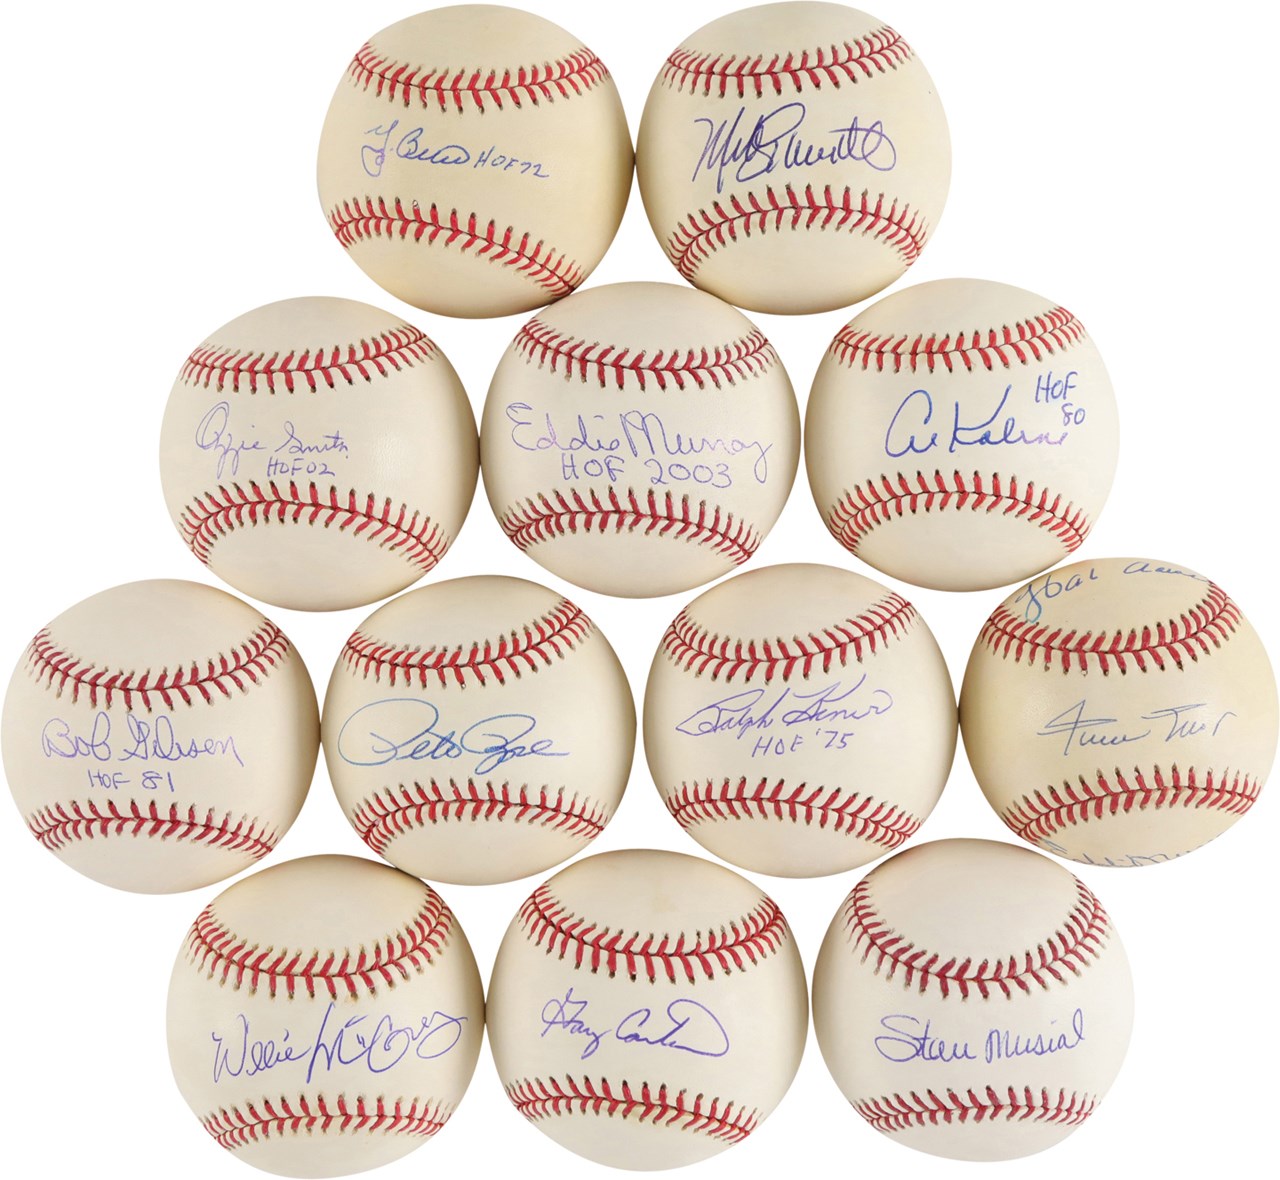 Baseball Autographs - HOFers & Stars Signed Baseball Collection w/Mays & Aaron (182)